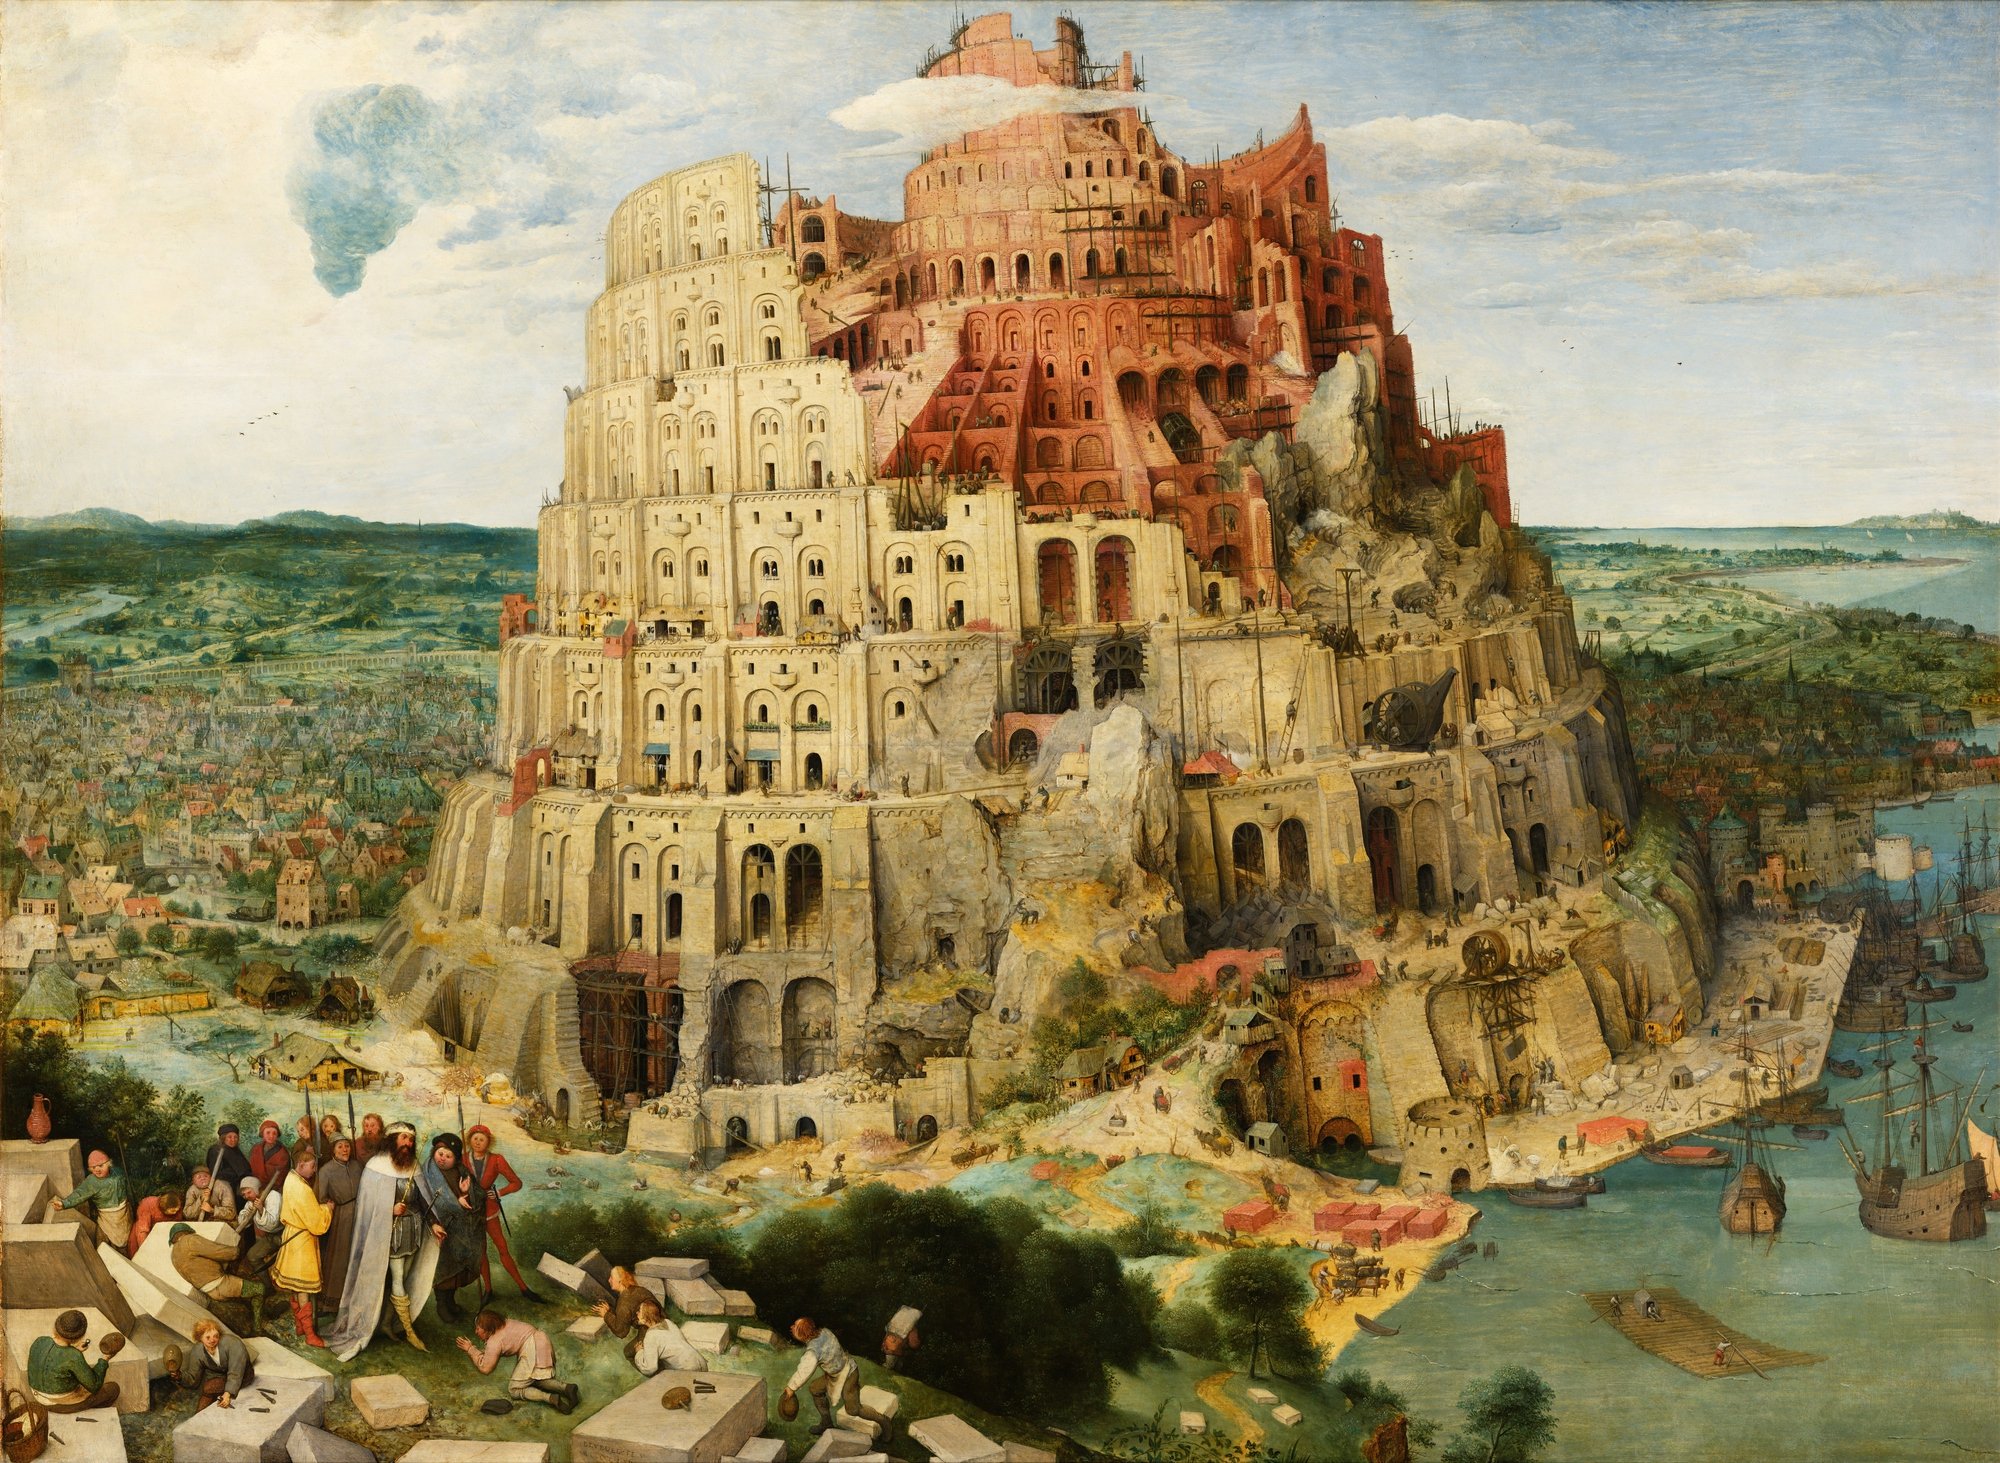 The Tower Of Babel (Vienna)